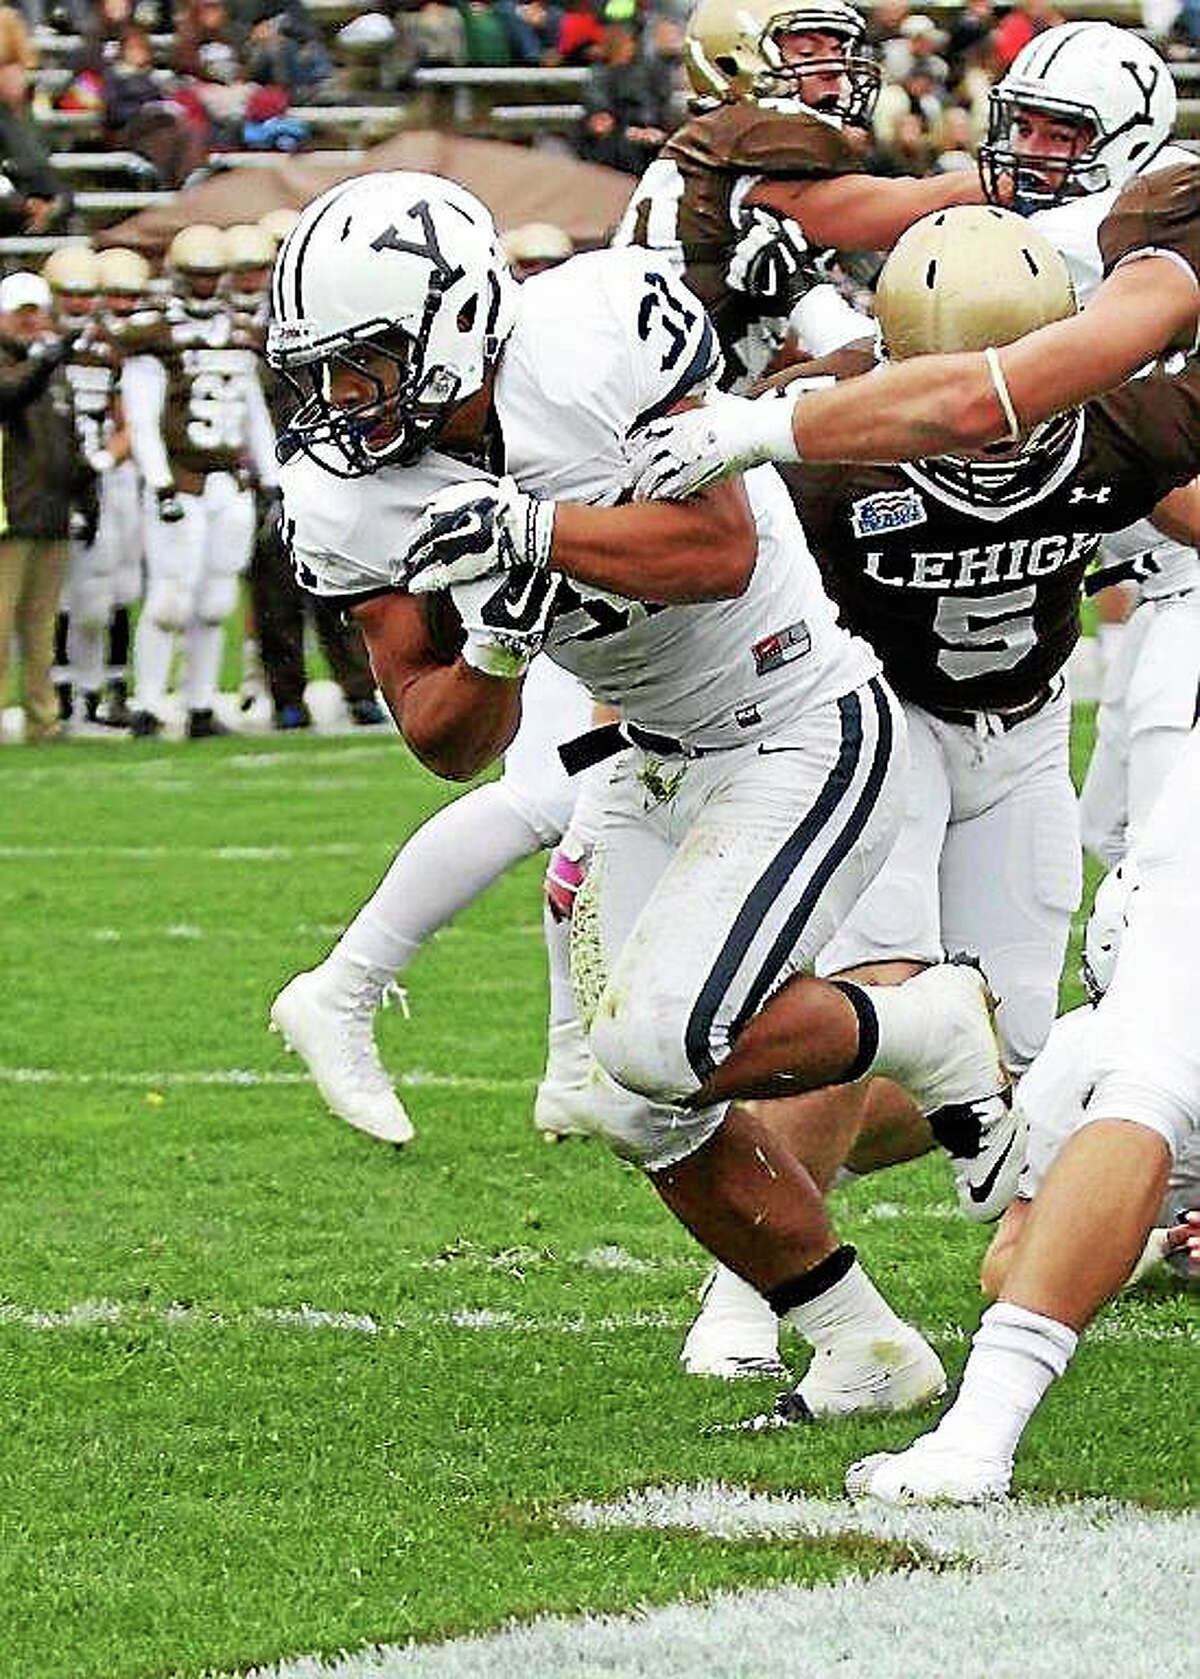 Yale sophomore running back Deshawn Salter rushed for 233 yards and two touchdowns in a 27-12 win over Lehigh on Saturday.